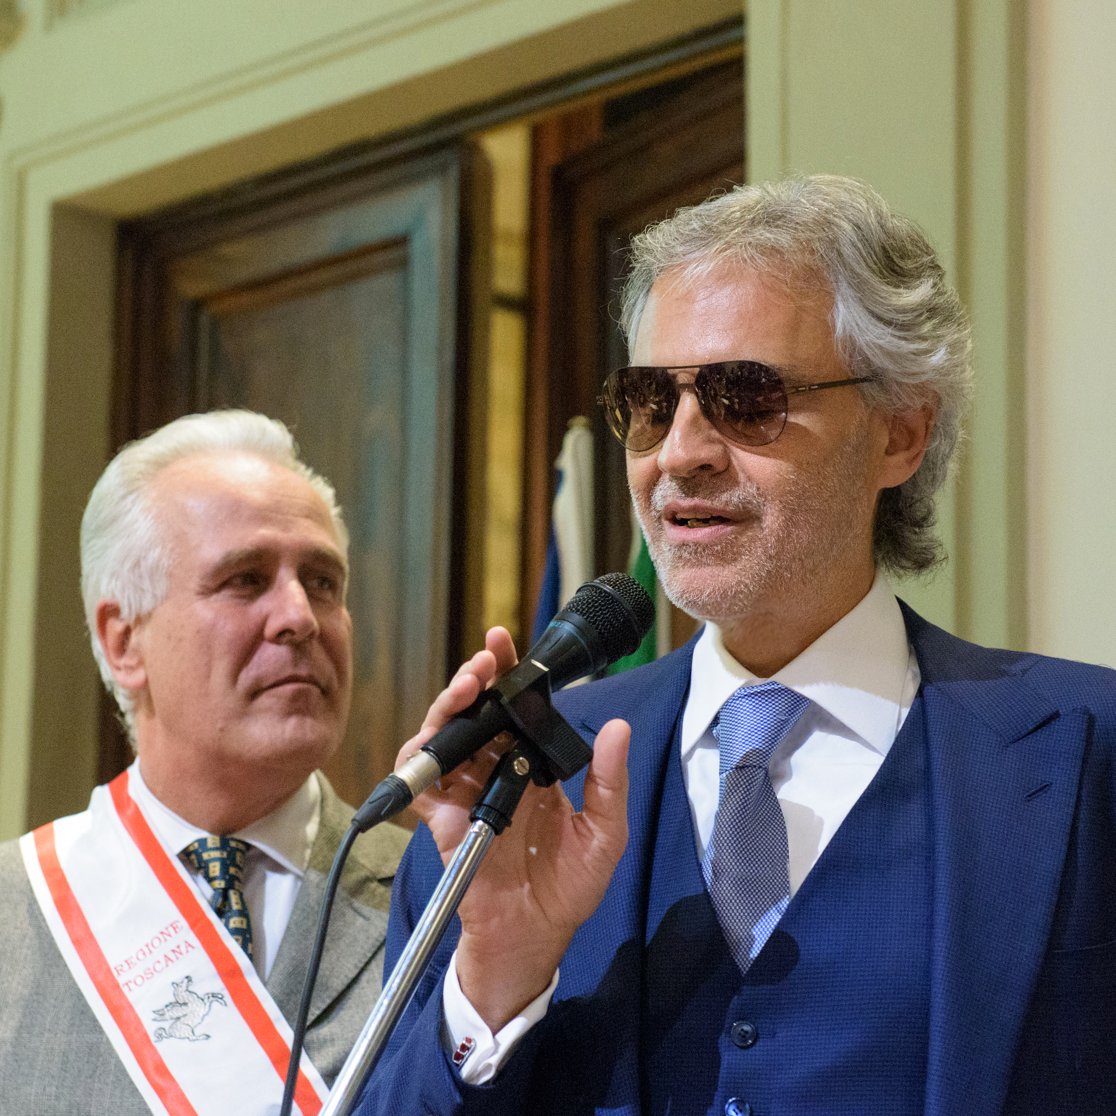 .@regionetoscana awarded Andrea Bocelli with the “Gonfalone d’Argento”,thanks to the philanthropic activity of the @andreabocellifoundation